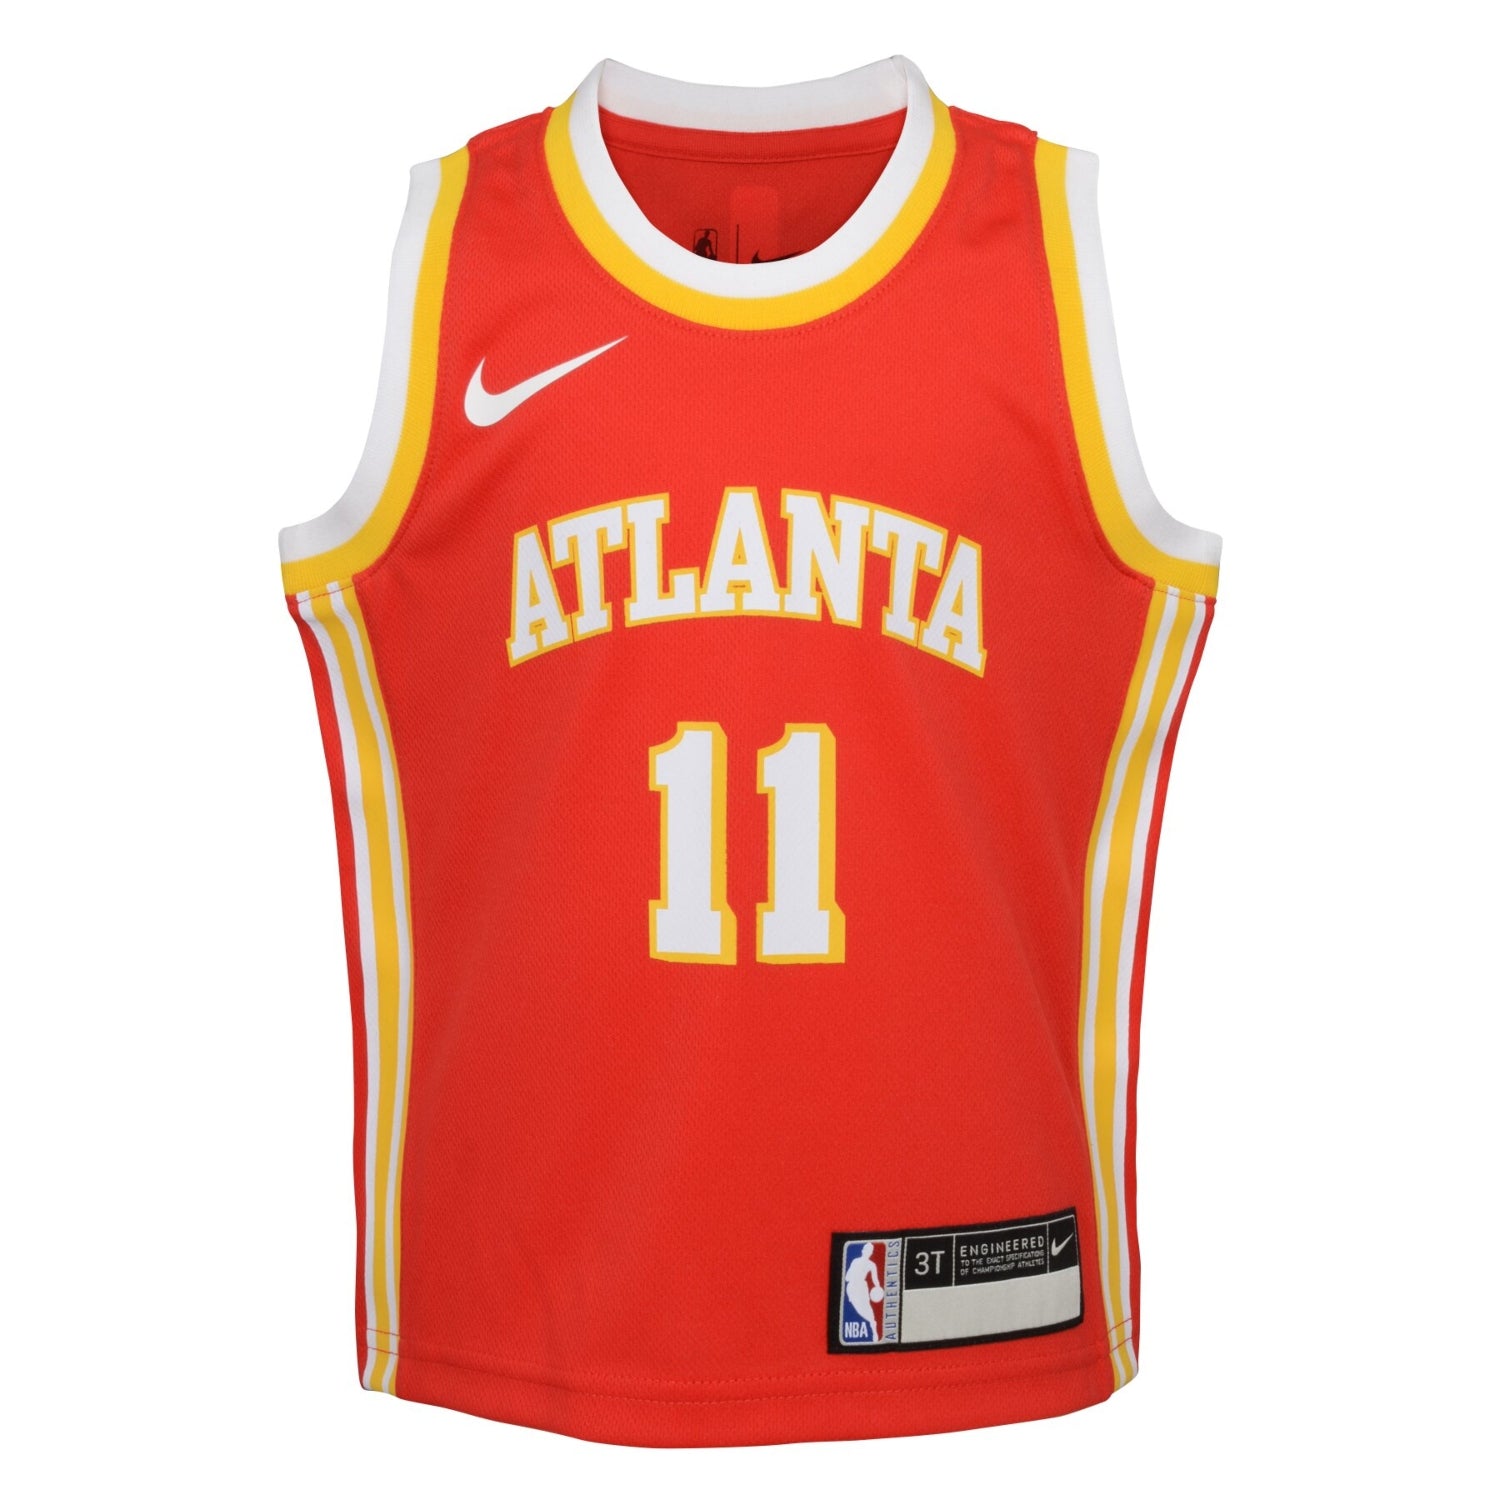 Toddler Young Nike Icon Edition Swingman Jersey - Hawks Shop